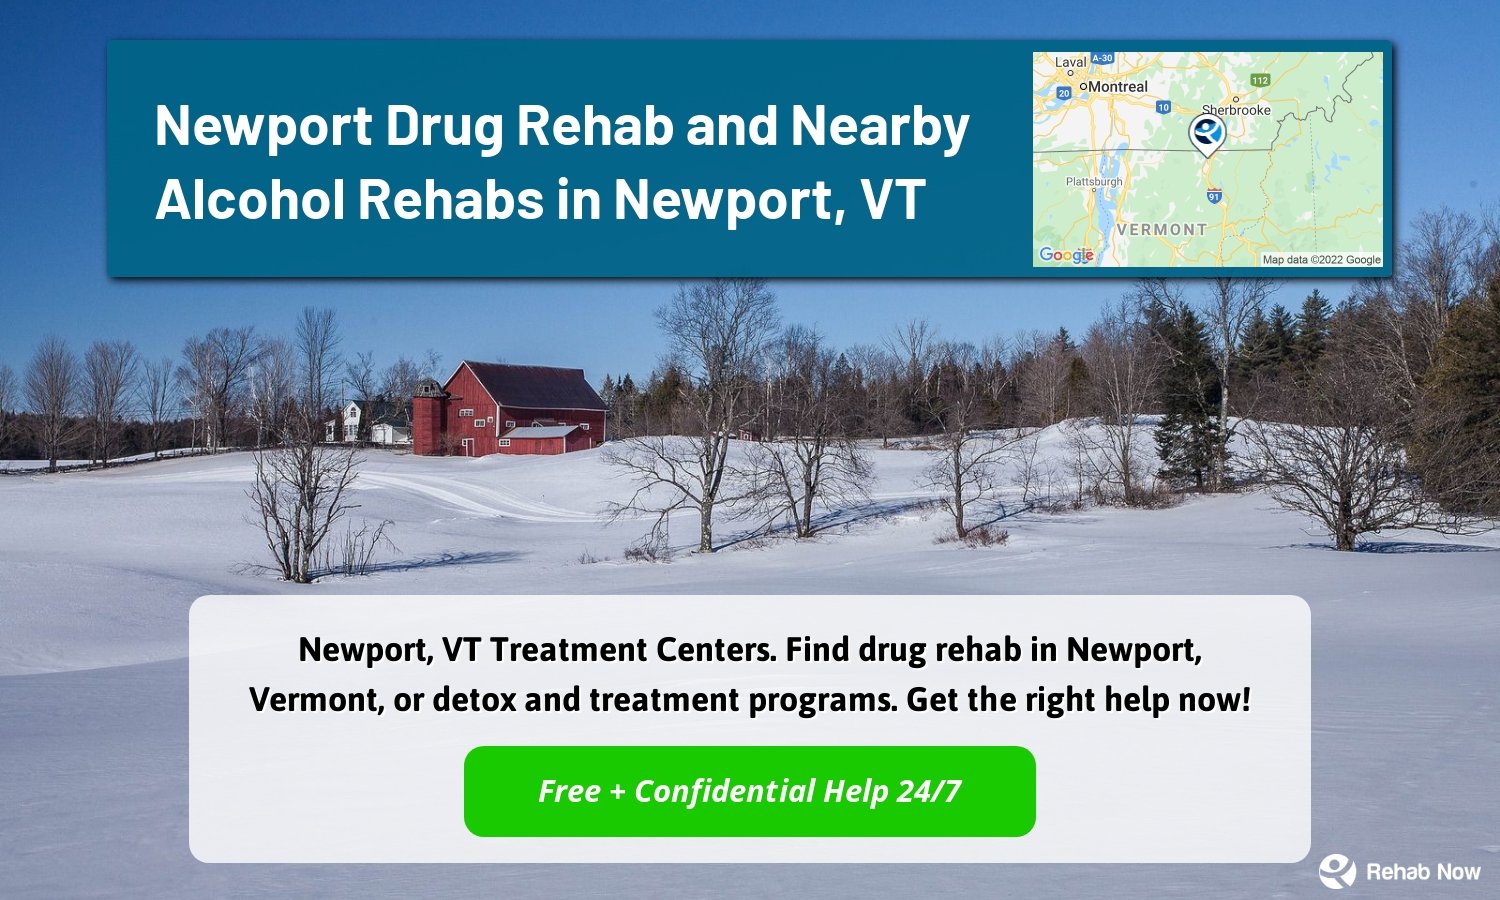 Newport, VT Treatment Centers. Find drug rehab in Newport, Vermont, or detox and treatment programs. Get the right help now!